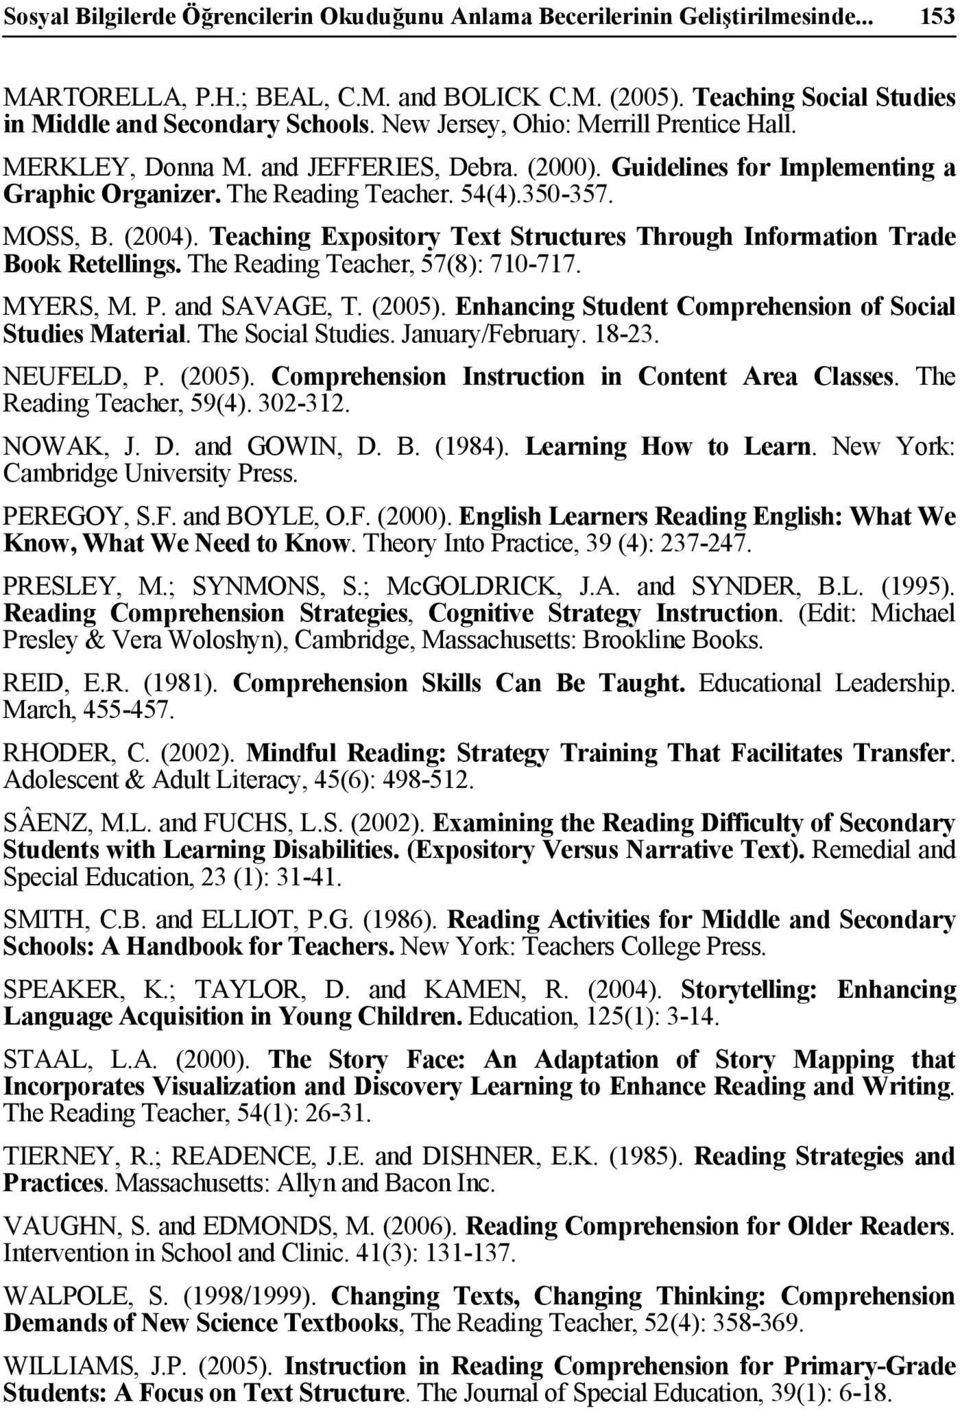 Teaching Expository Text Structures Through Information Trade Book Retellings. The Reading Teacher, 57(8): 710-717. MYERS, M. P. and SAVAGE, T. (2005).